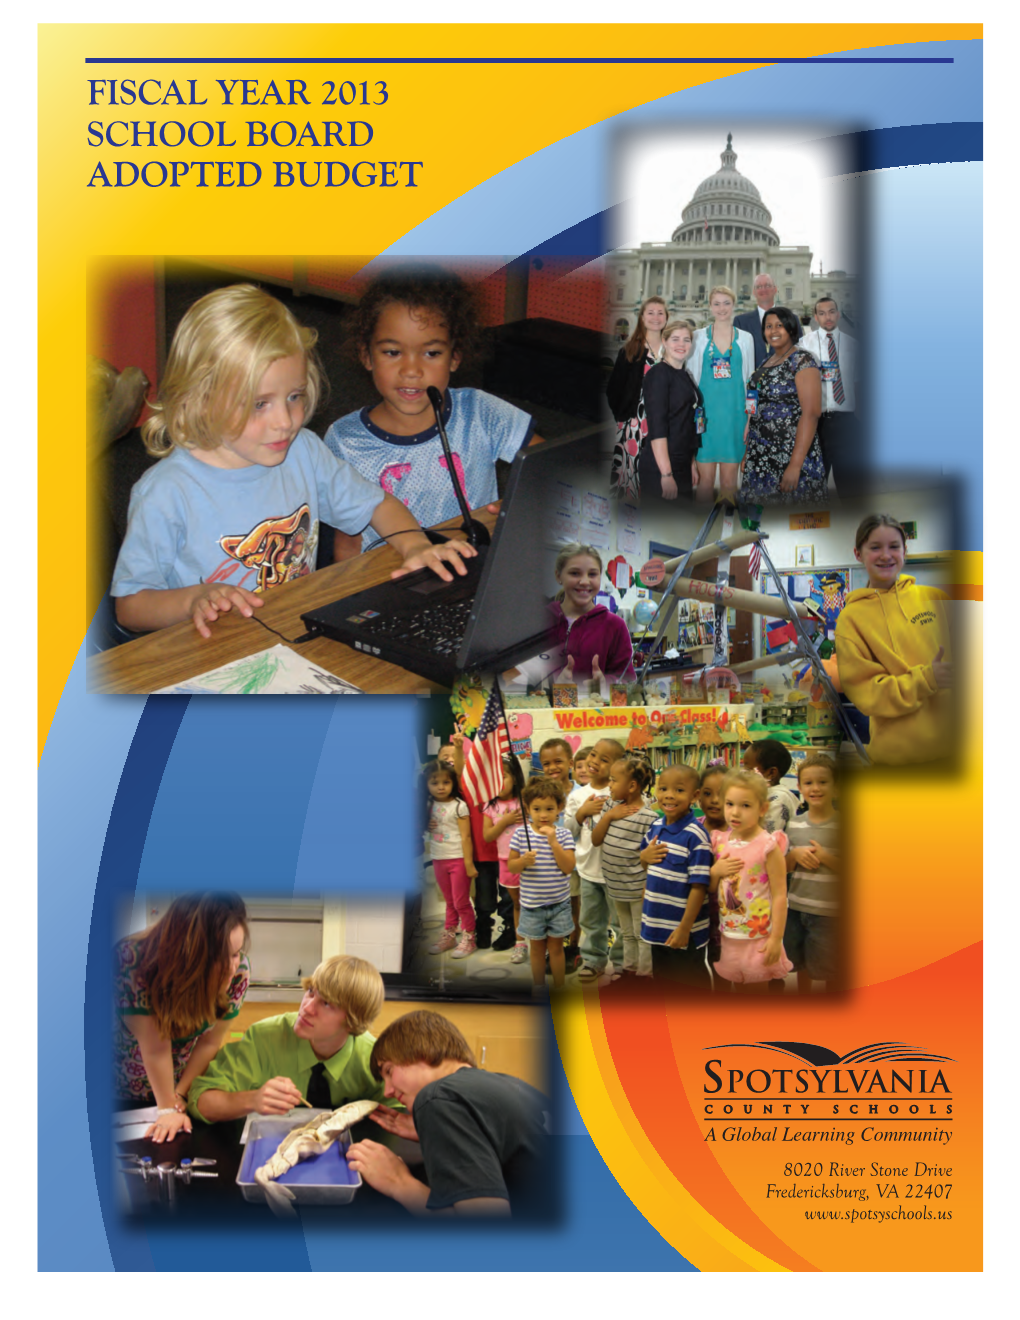 Adopted Budget Table of Contents